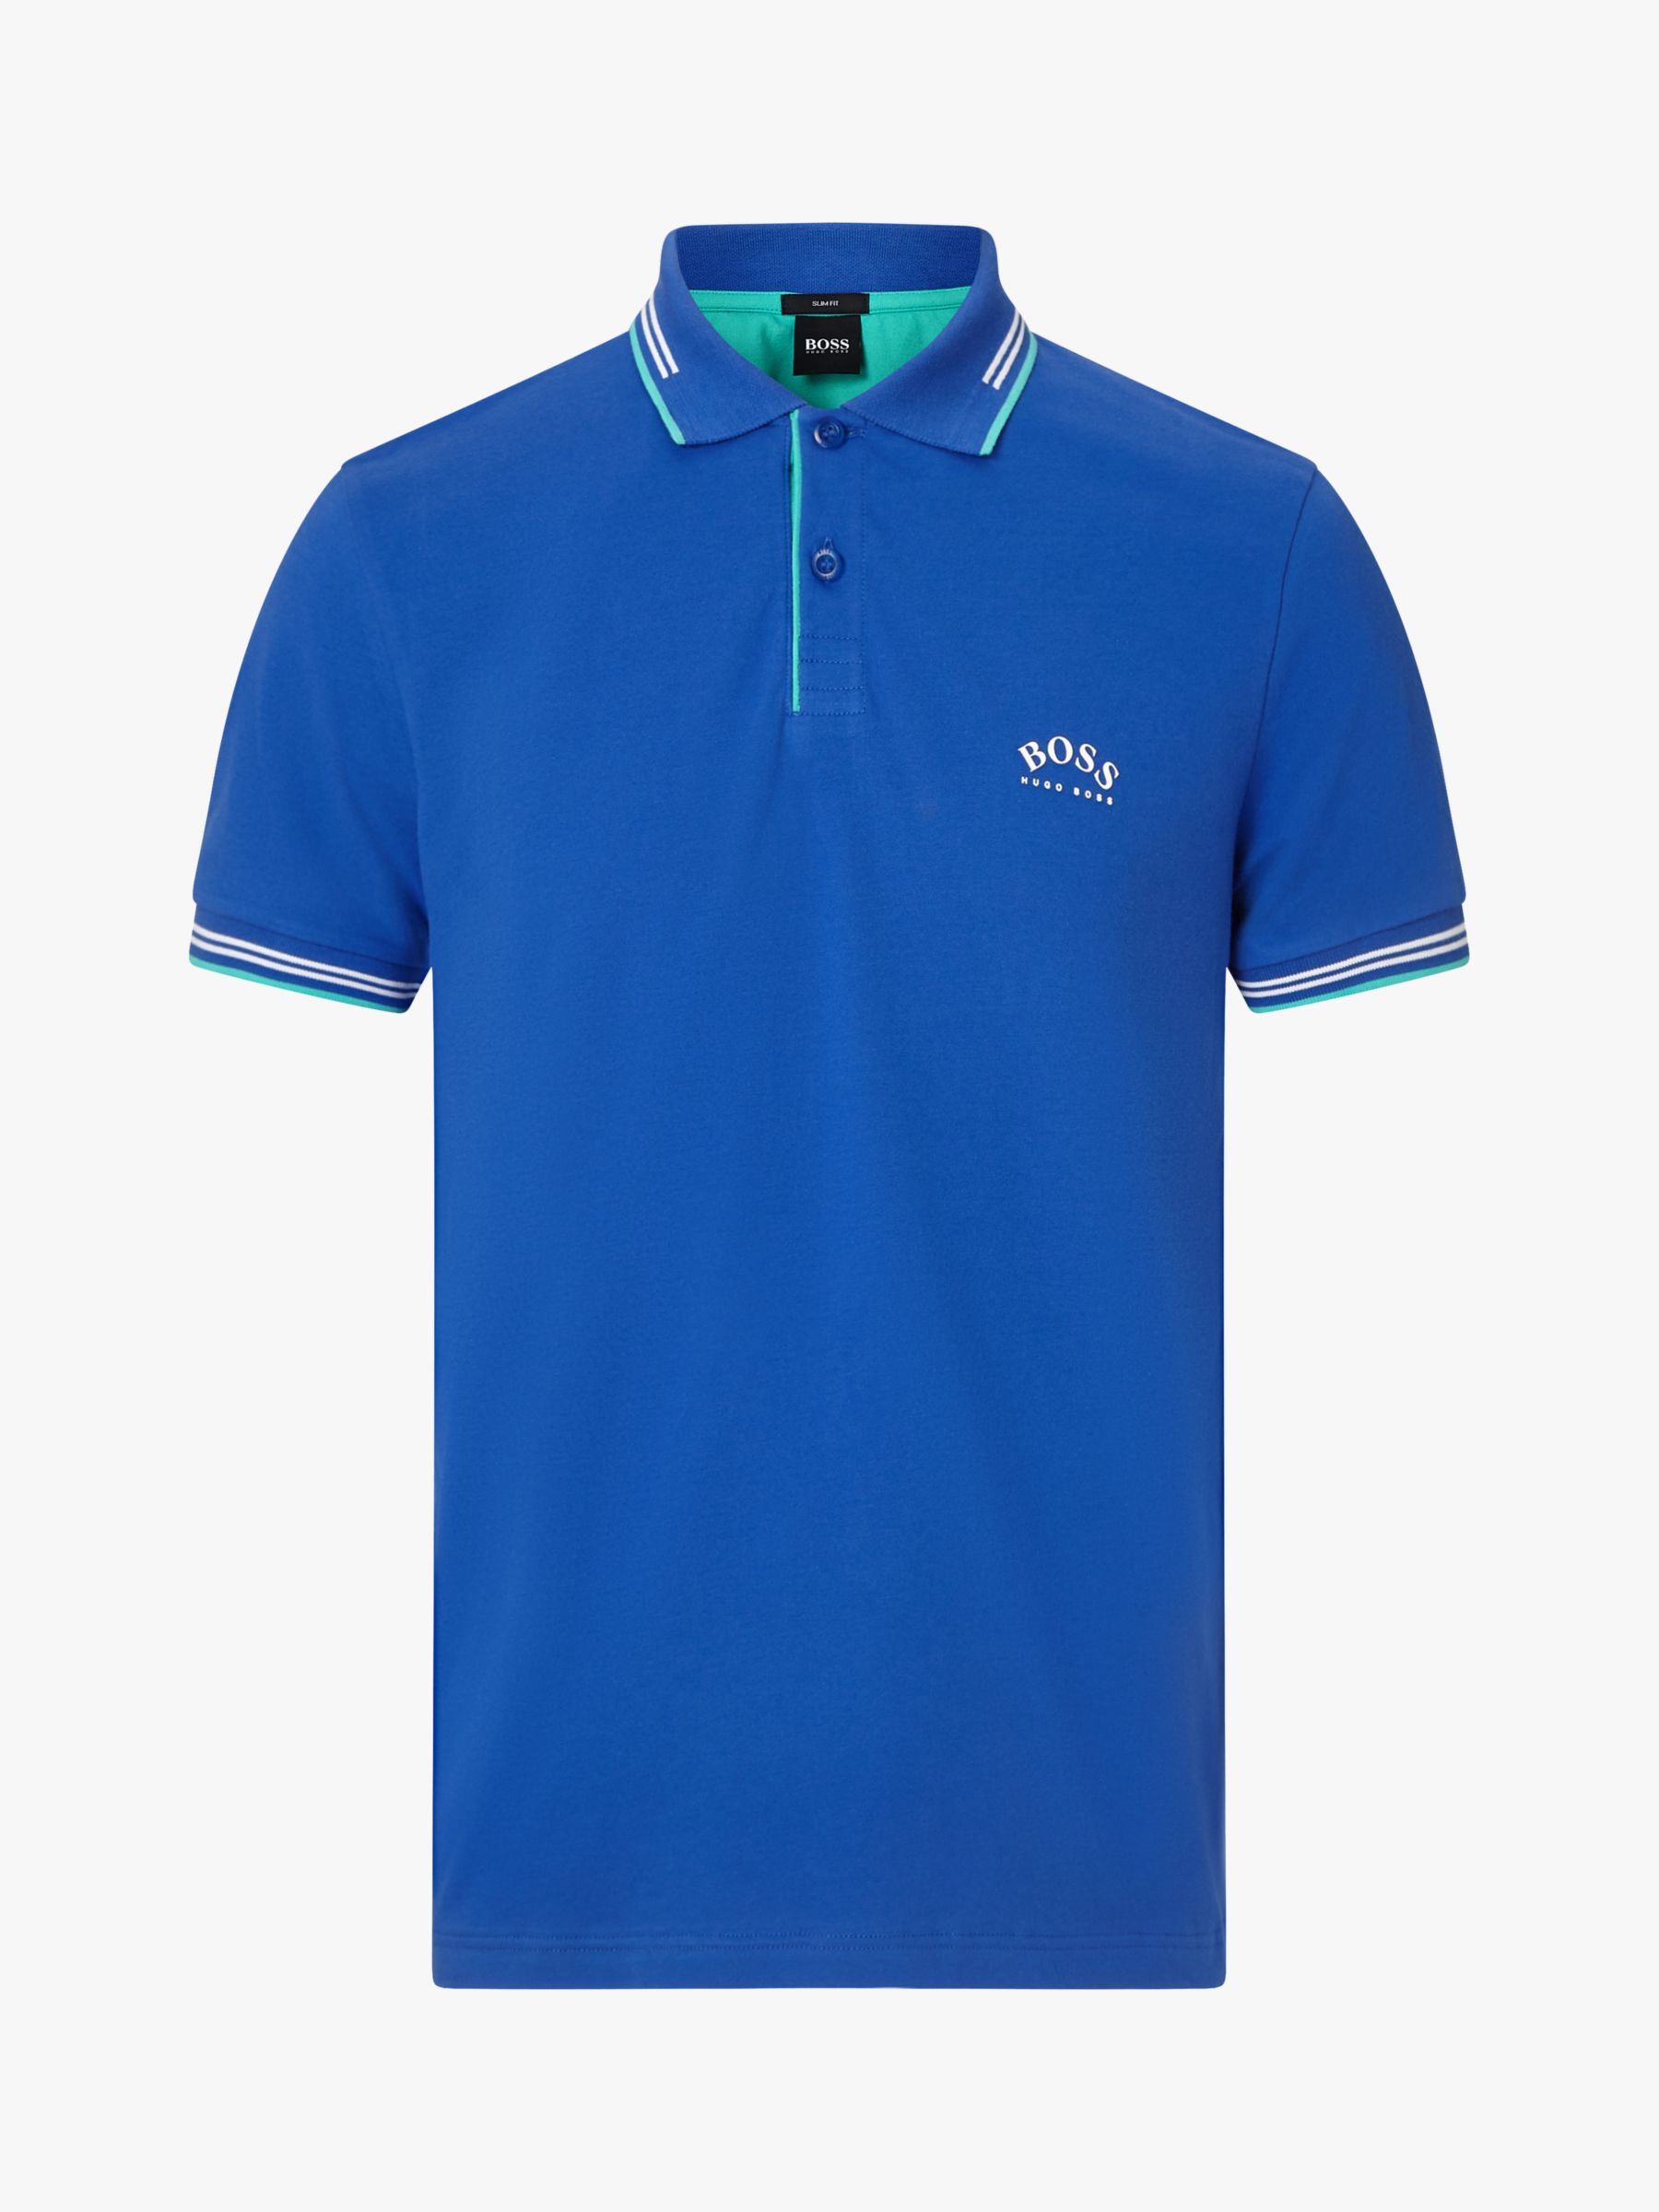 BOSS Paul Curved Logo Tipped Slim Fit Polo Shirt